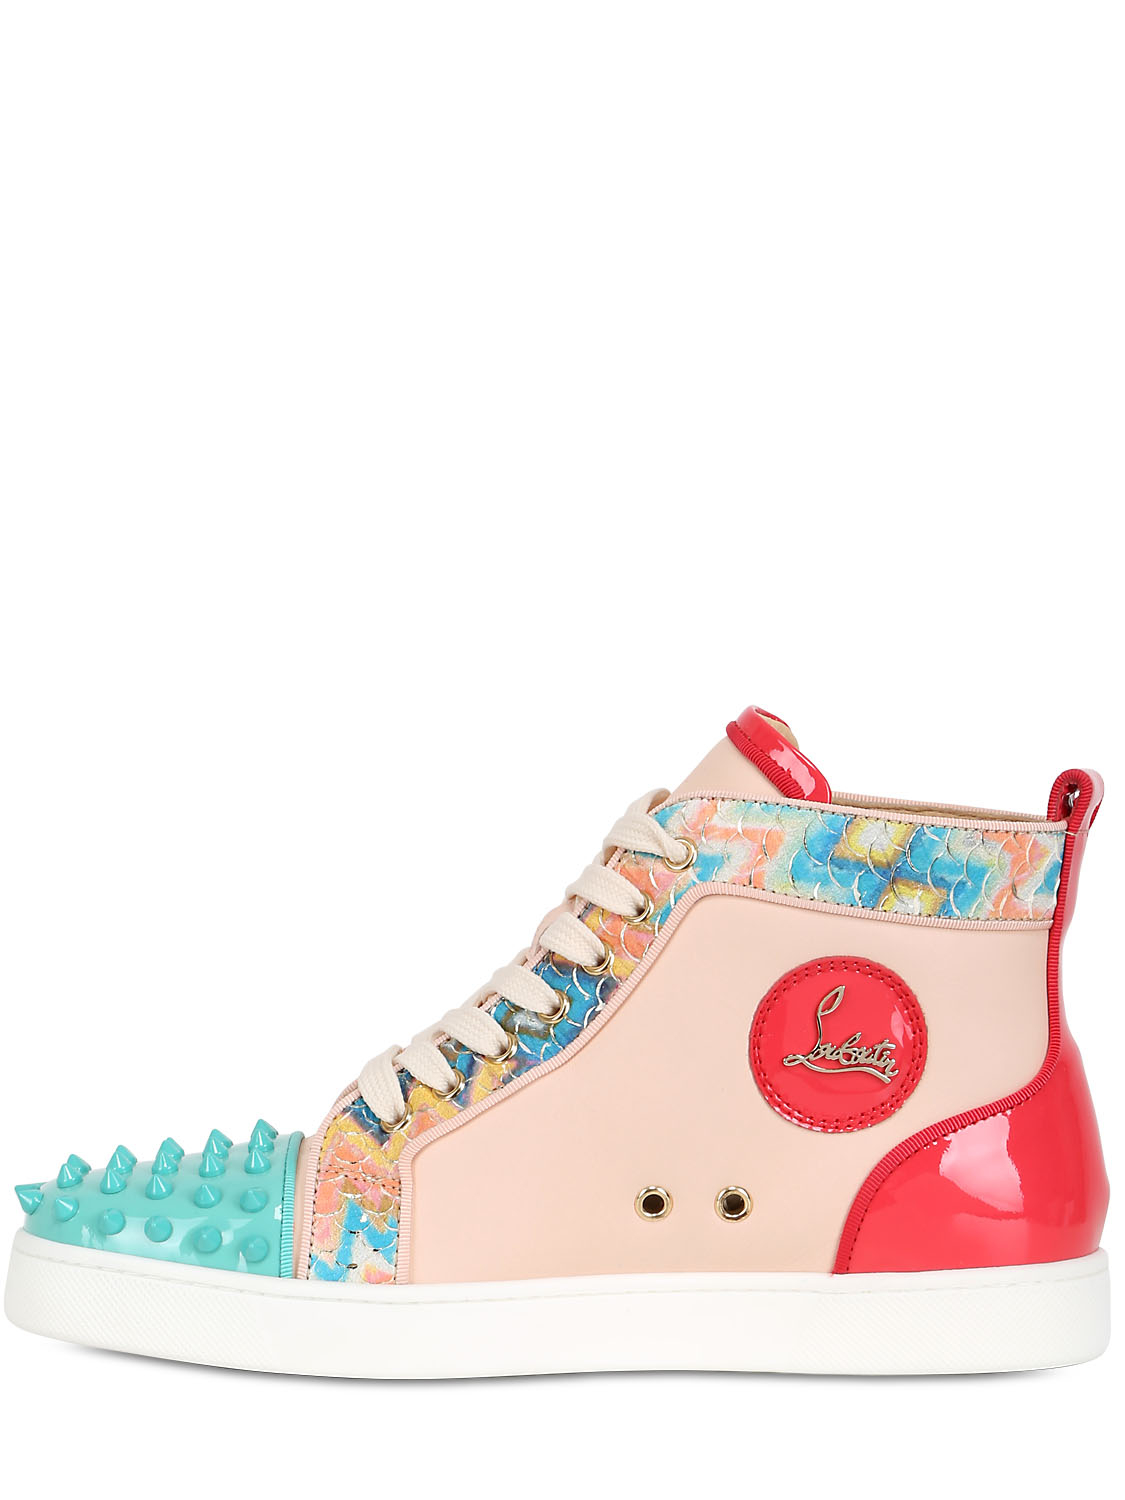 Christian louboutin Spiked Patent Leather High Top Sneakers in ...  